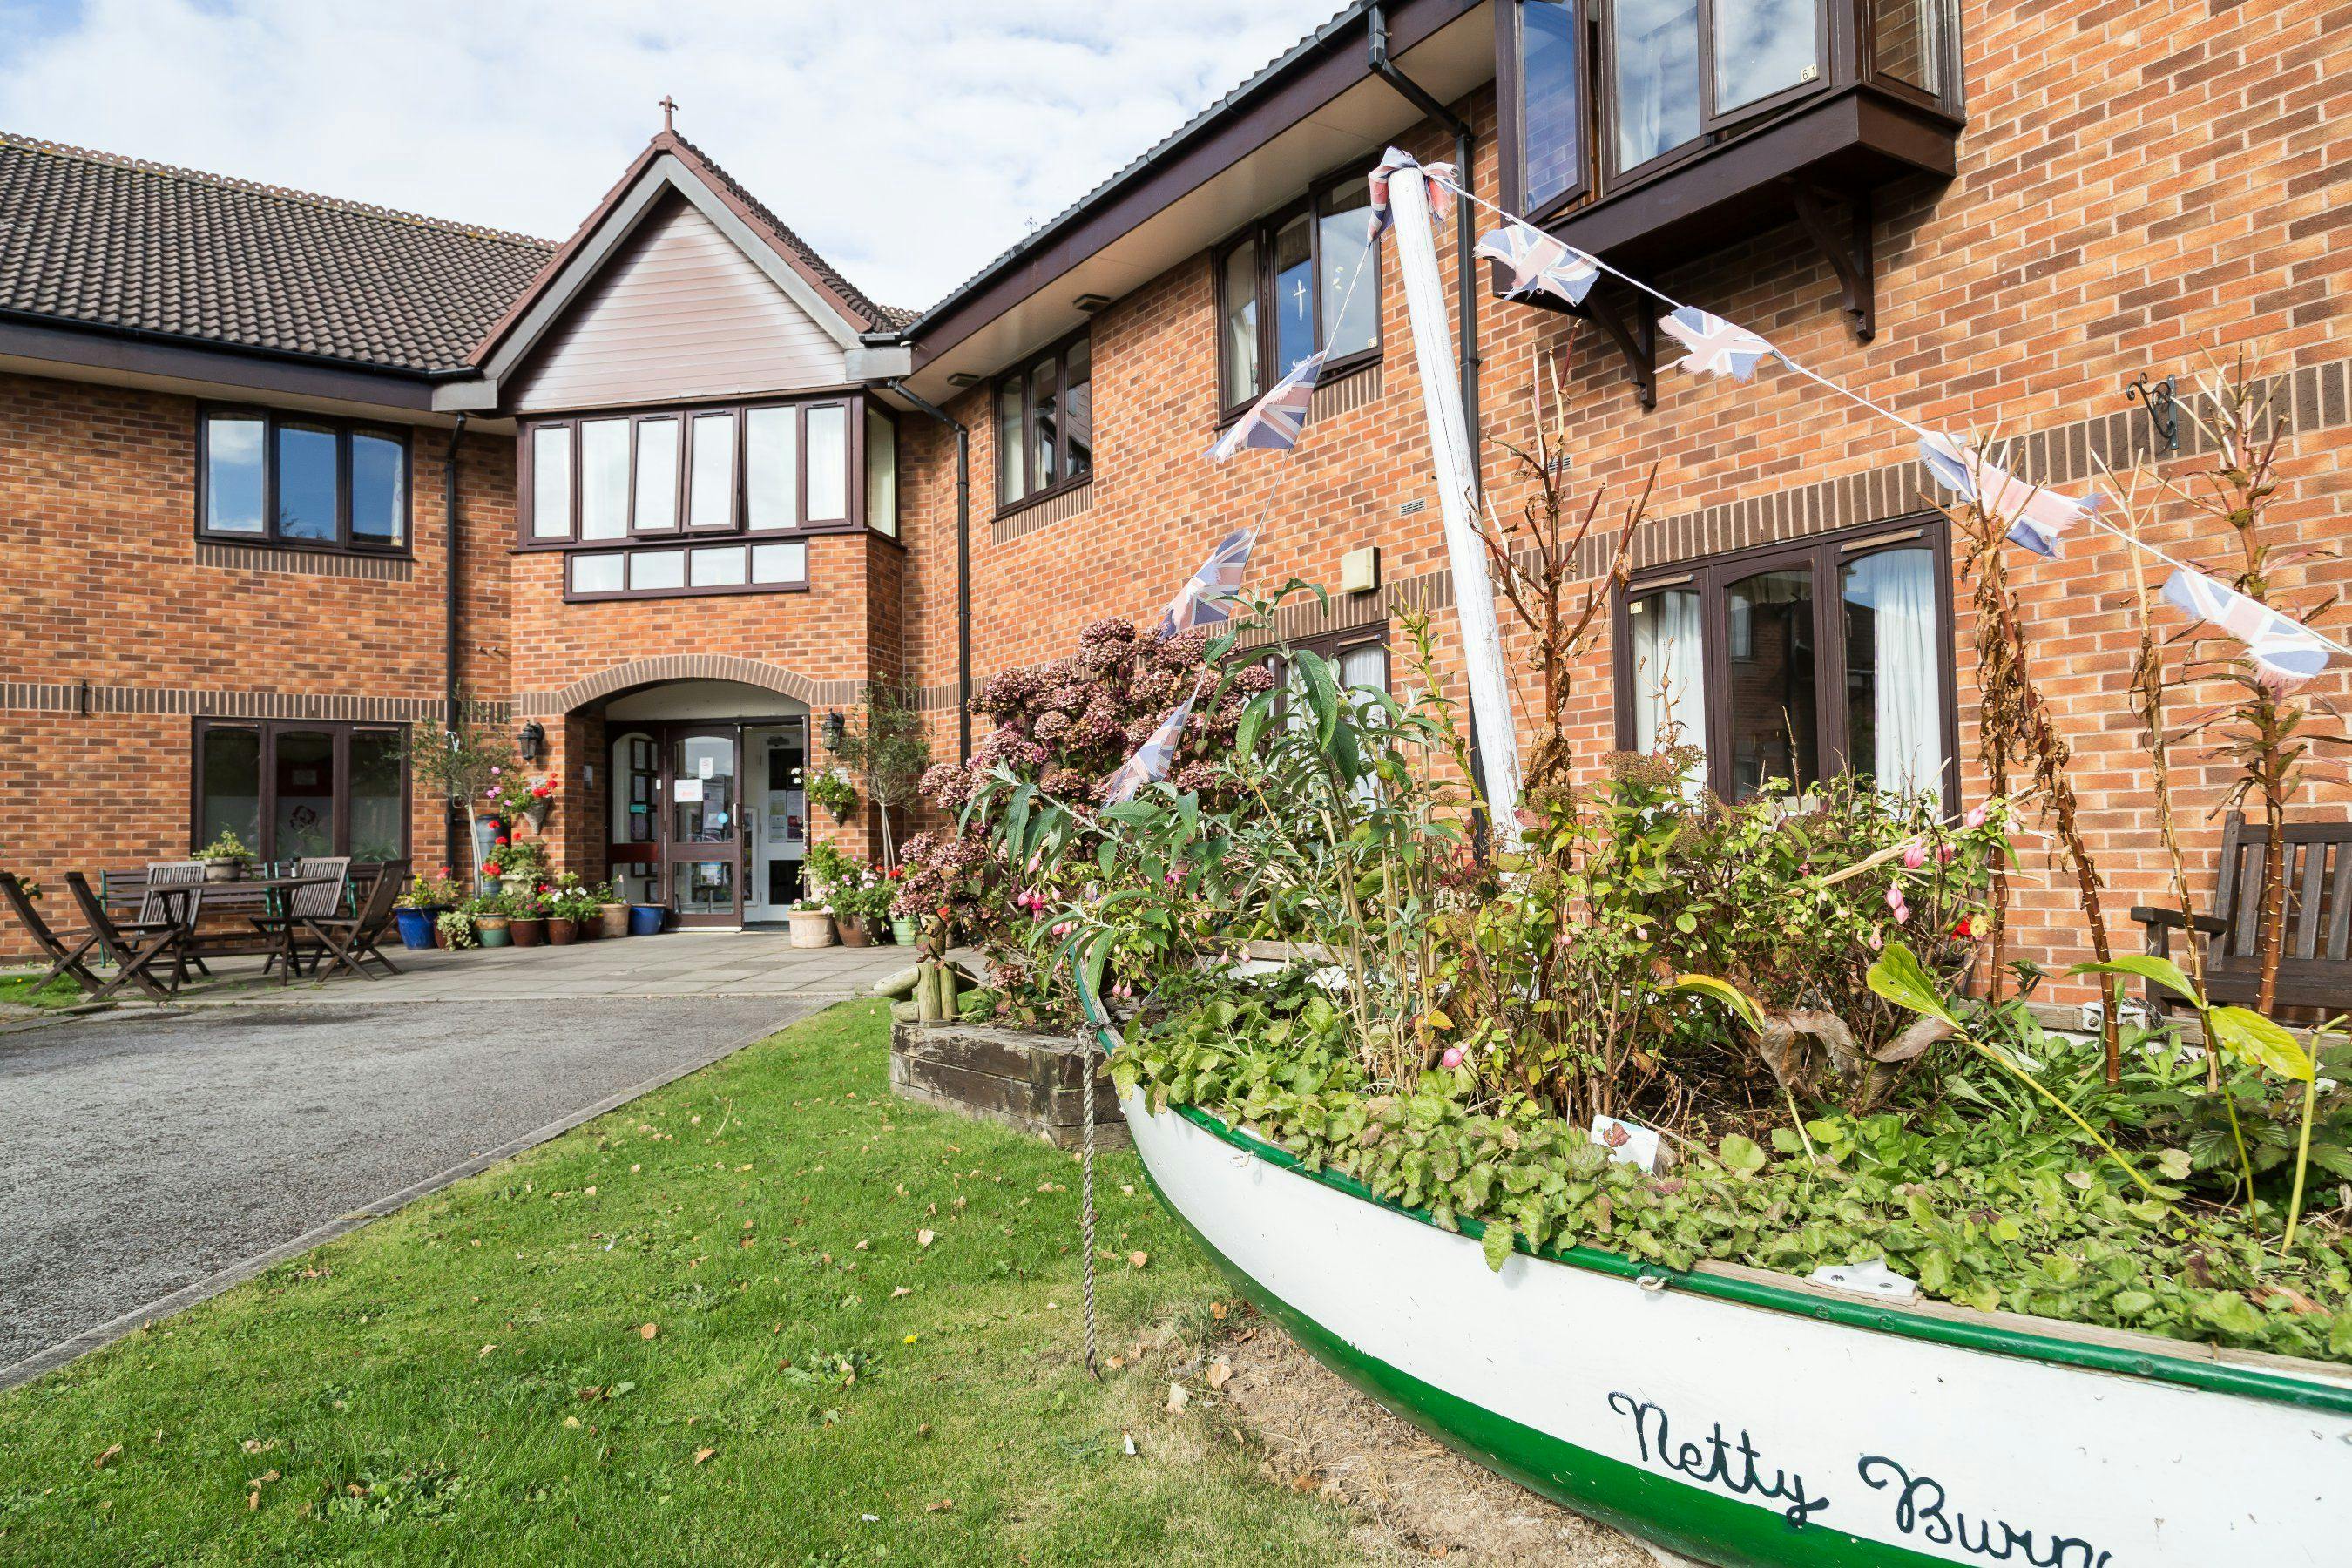 Exterior of Mallard Court Care home in Bridlington, East Riding of Yorkshire